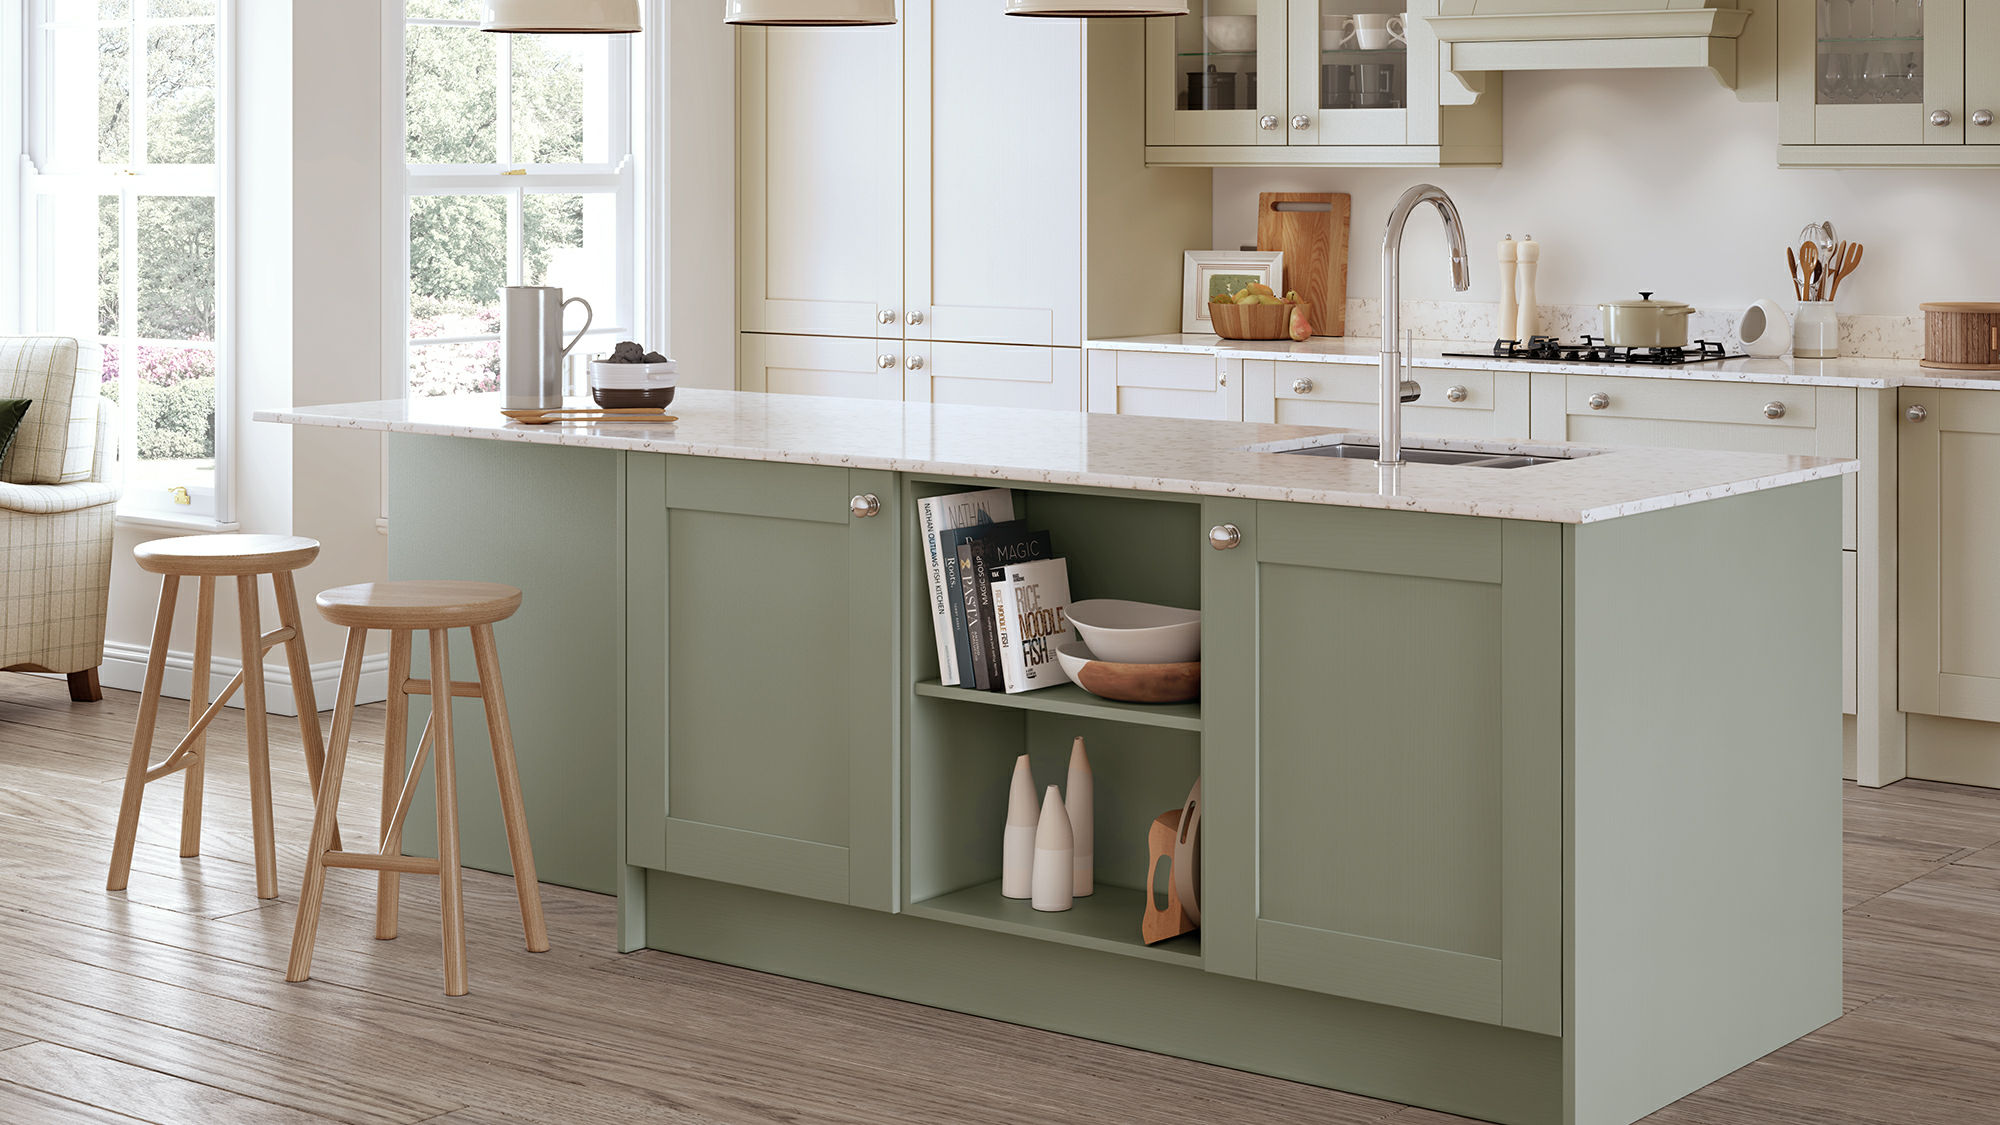 Madison Solid Wood Sage Green kitchens offering durability and a classic style with a gentle sage green finish